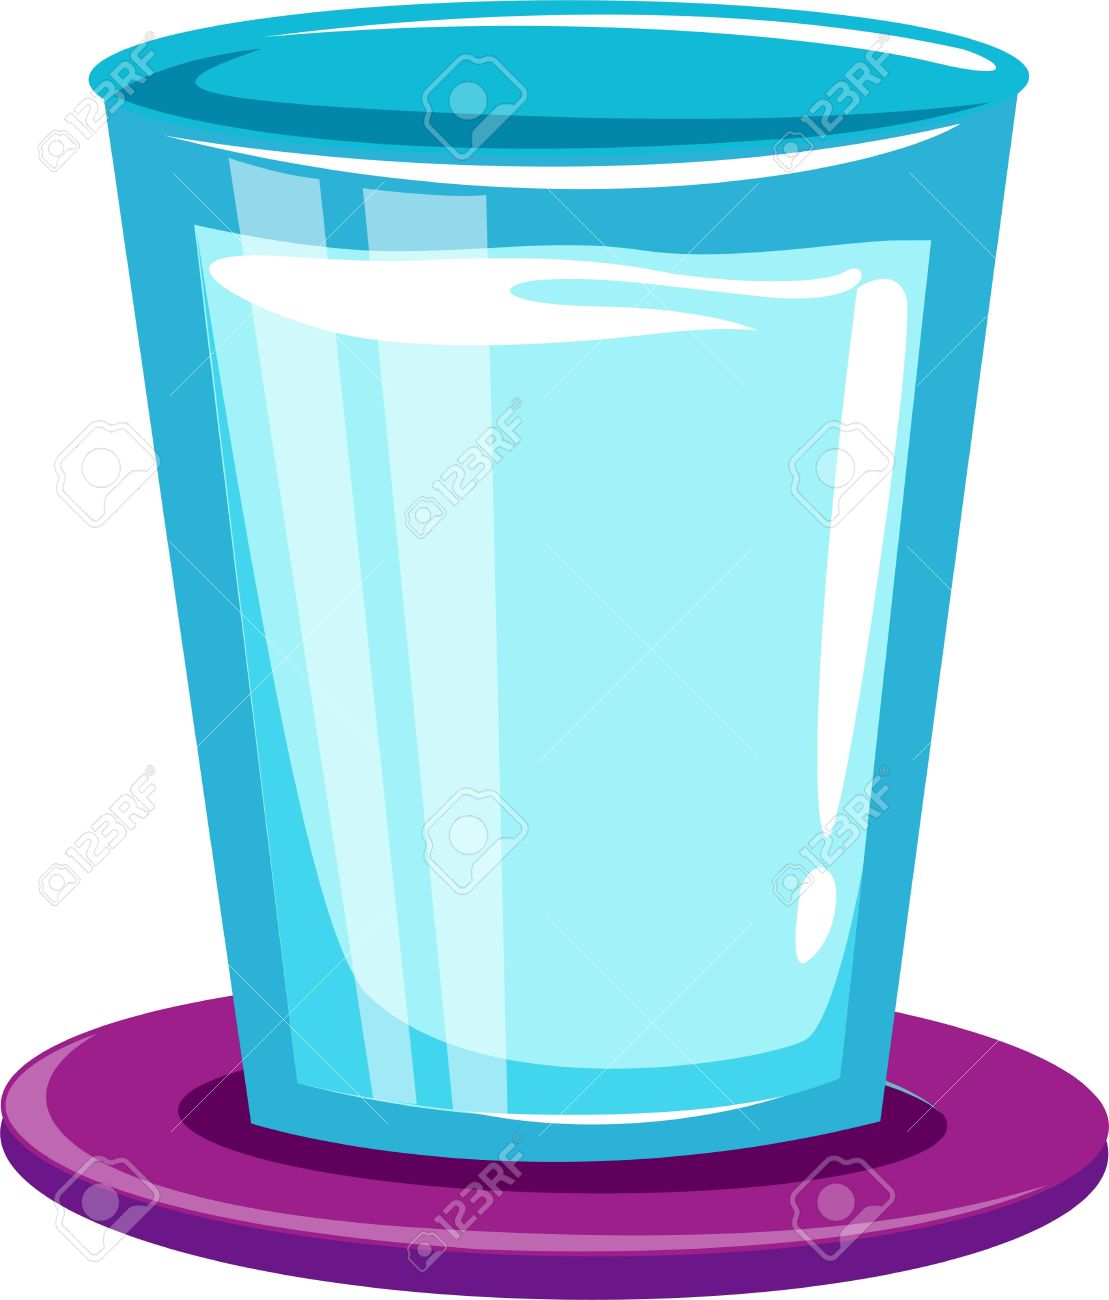 clipart of a glass of water - photo #32